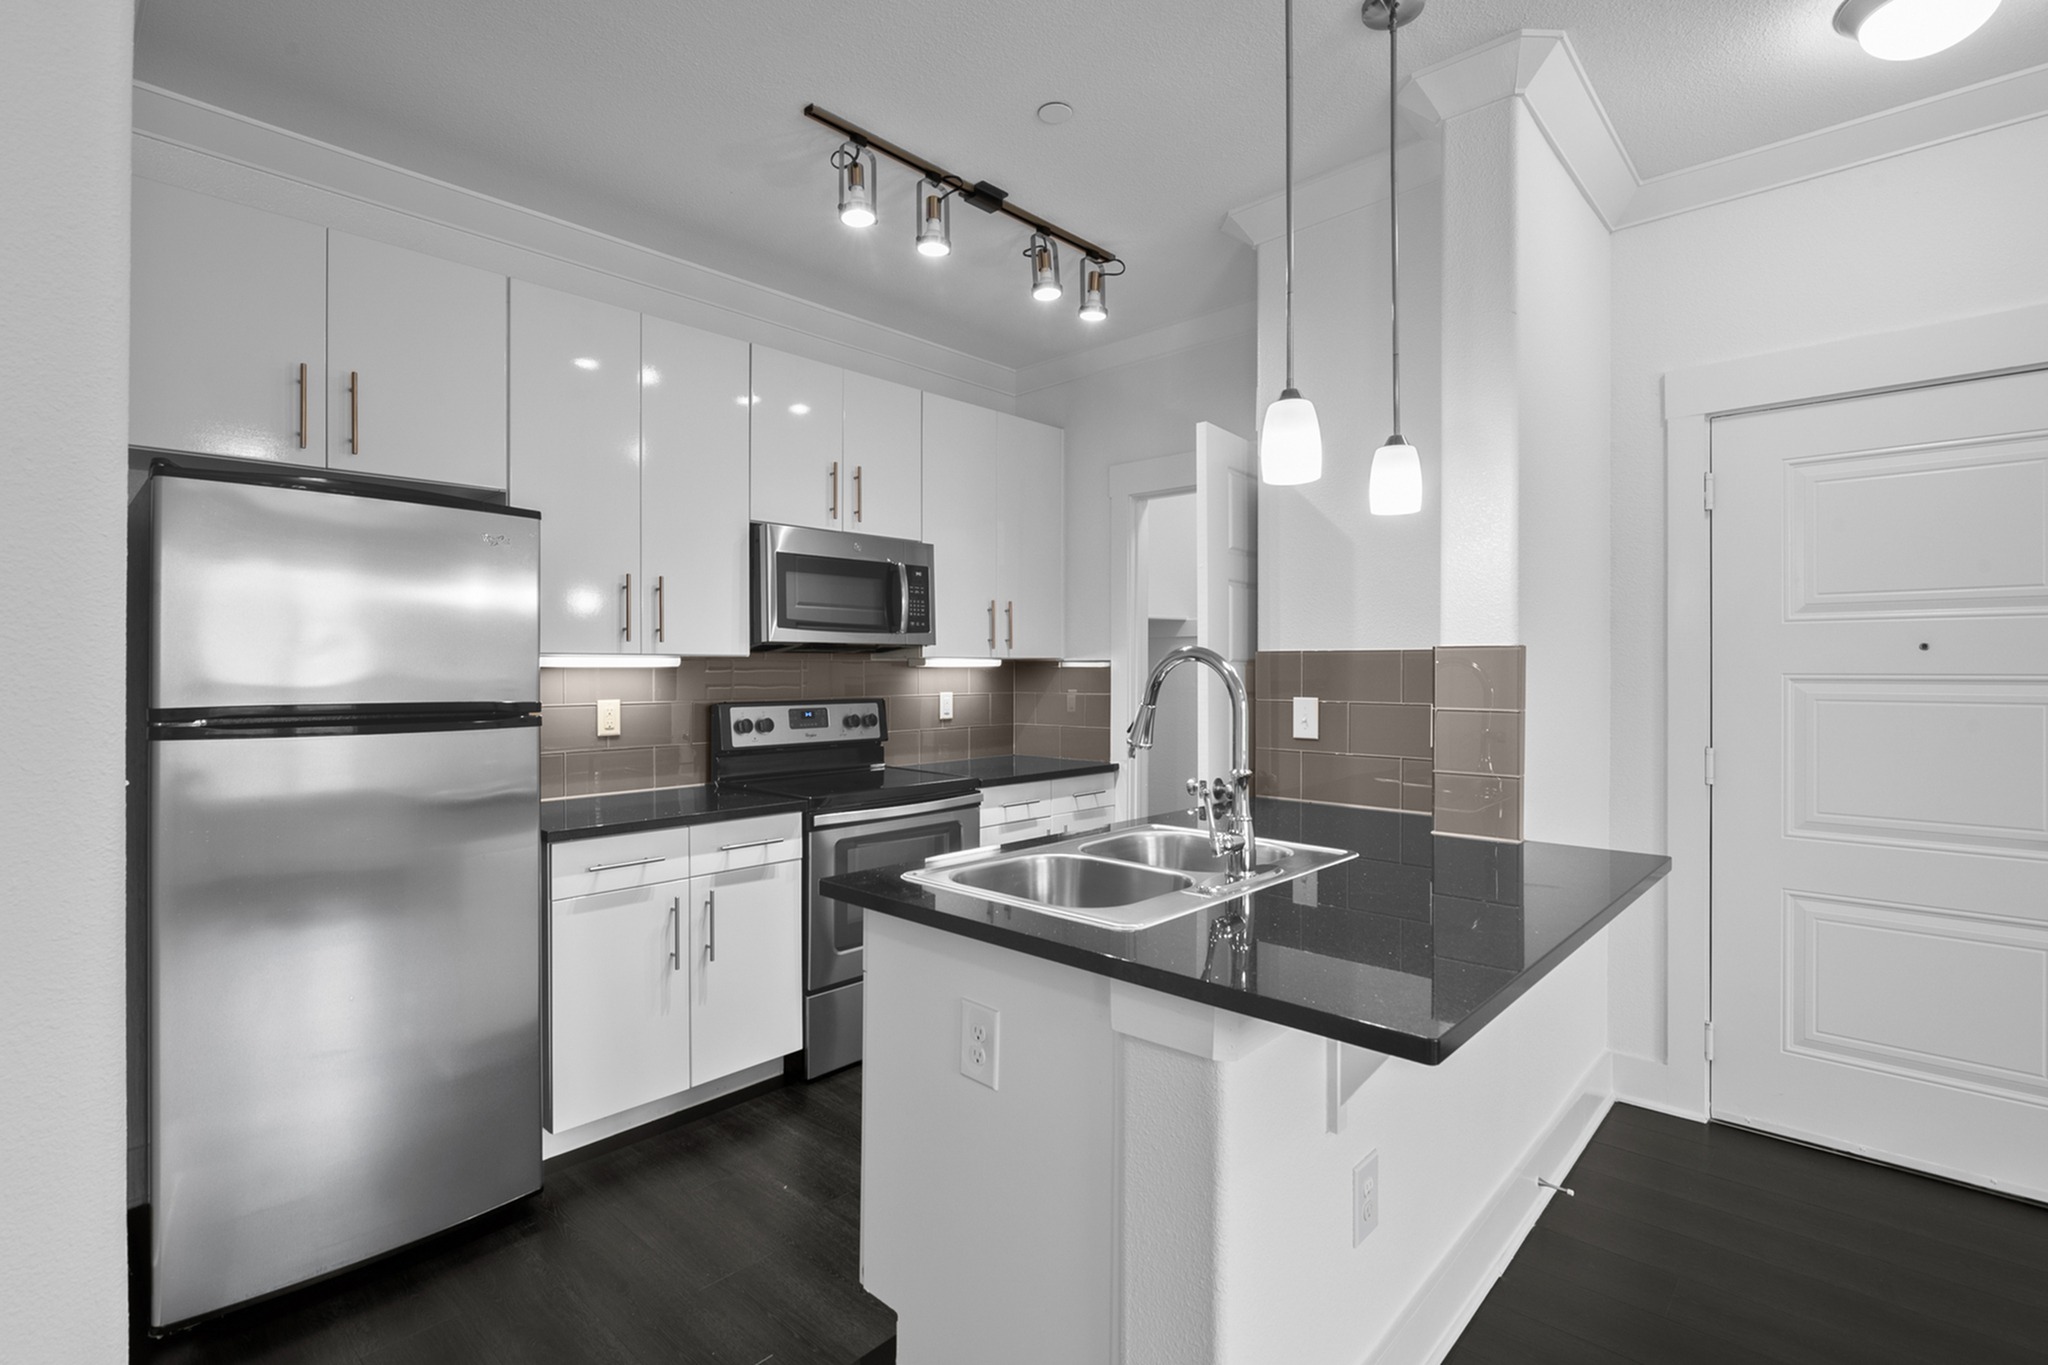 Floor Plan 1 Kitchen | Apartments Conroe | The Towers Woodland